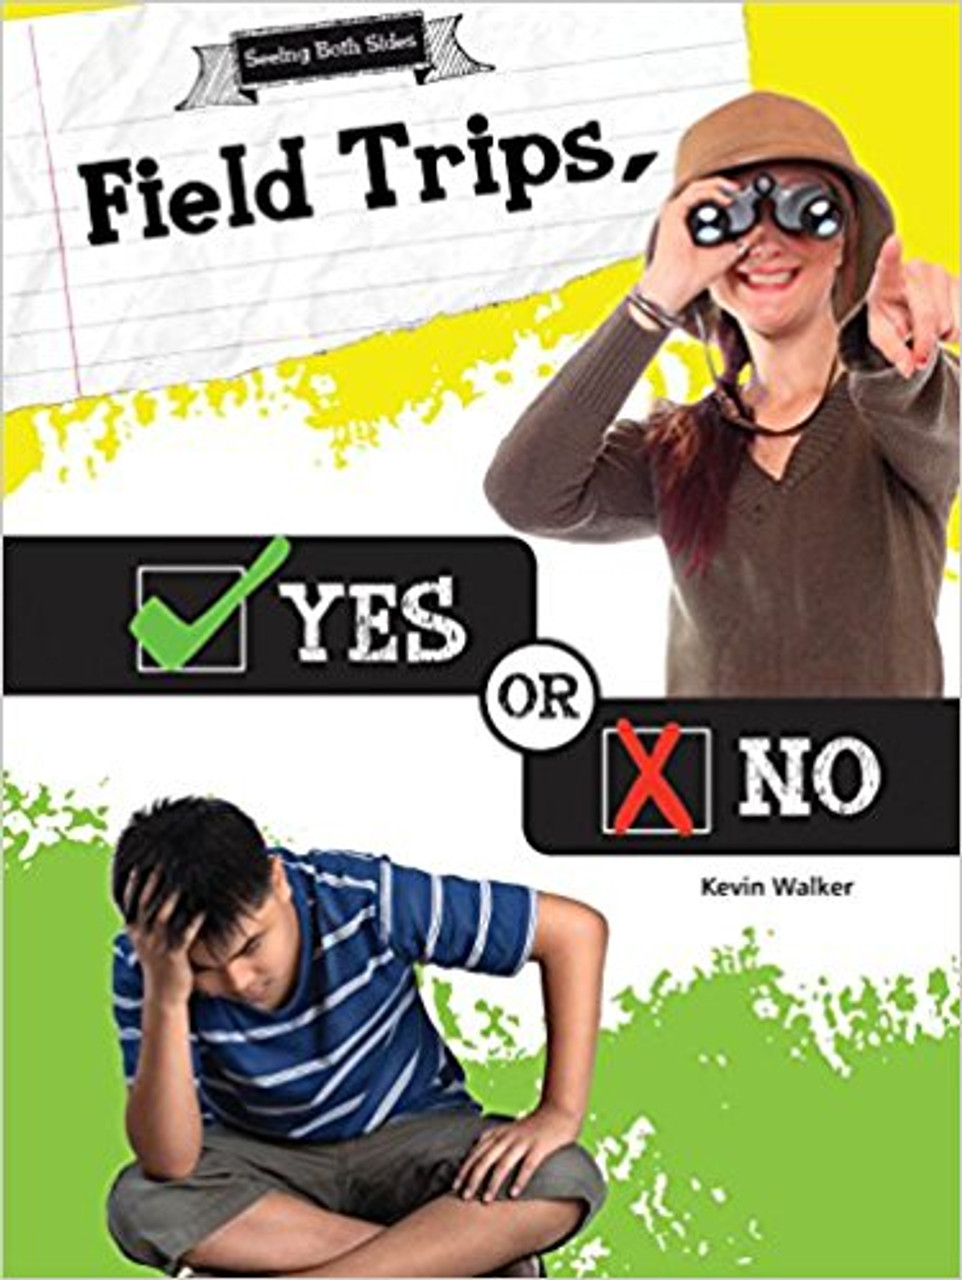 This introduction to opinion writing serves as a mentor text to students learning to express their own opinions in persuasive essays and other opinion-based writing assignments using topics relevant to students as examples. Both sides of the debate are explored equally. Includes writing prompts.